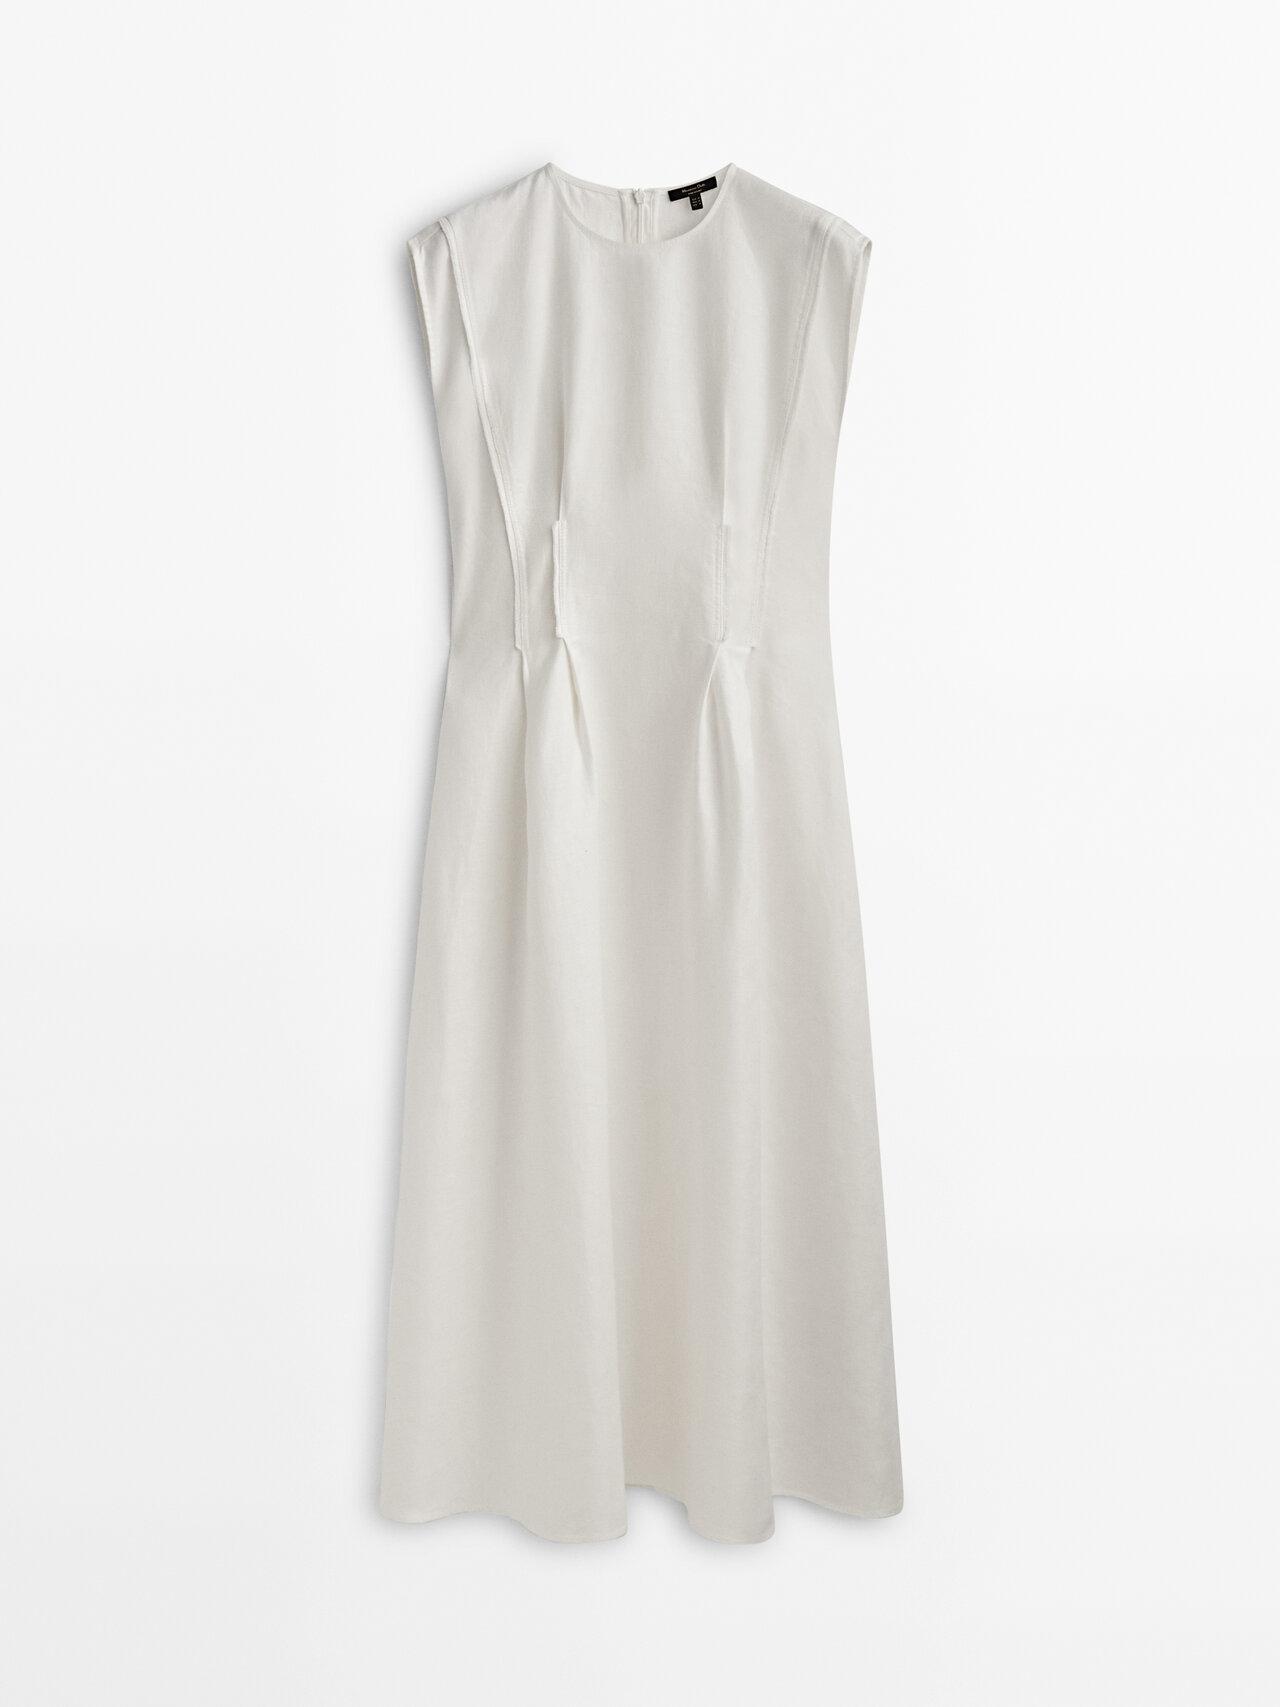 MASSIMO DUTTI Linen Dress With Darts And Seam Details in White | Lyst